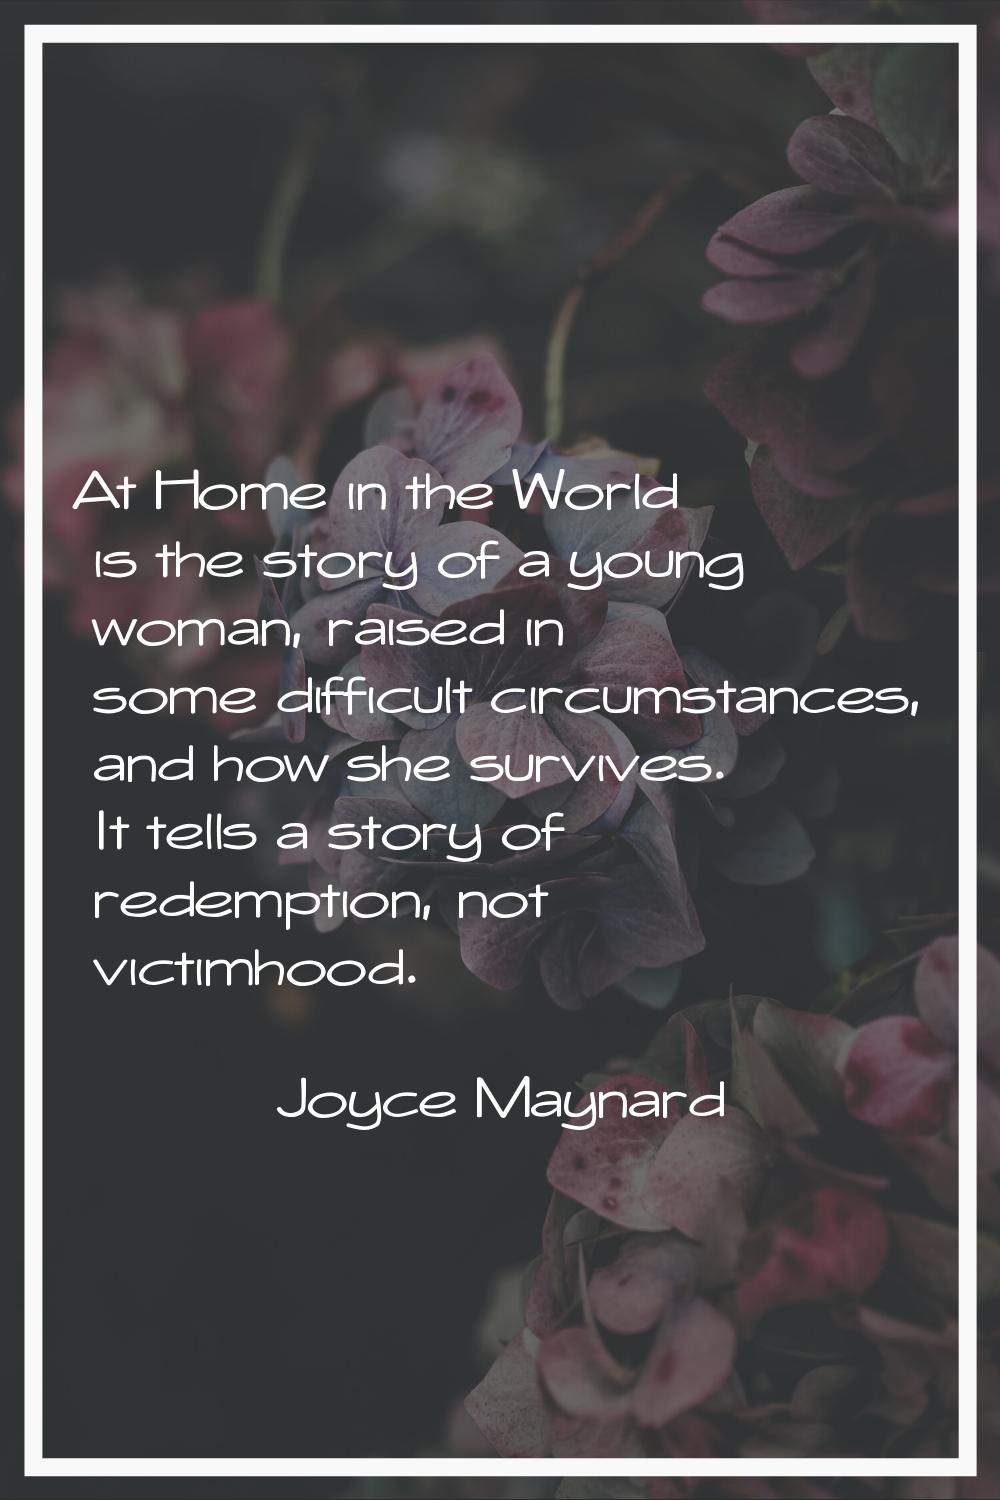 At Home in the World is the story of a young woman, raised in some difficult circumstances, and how